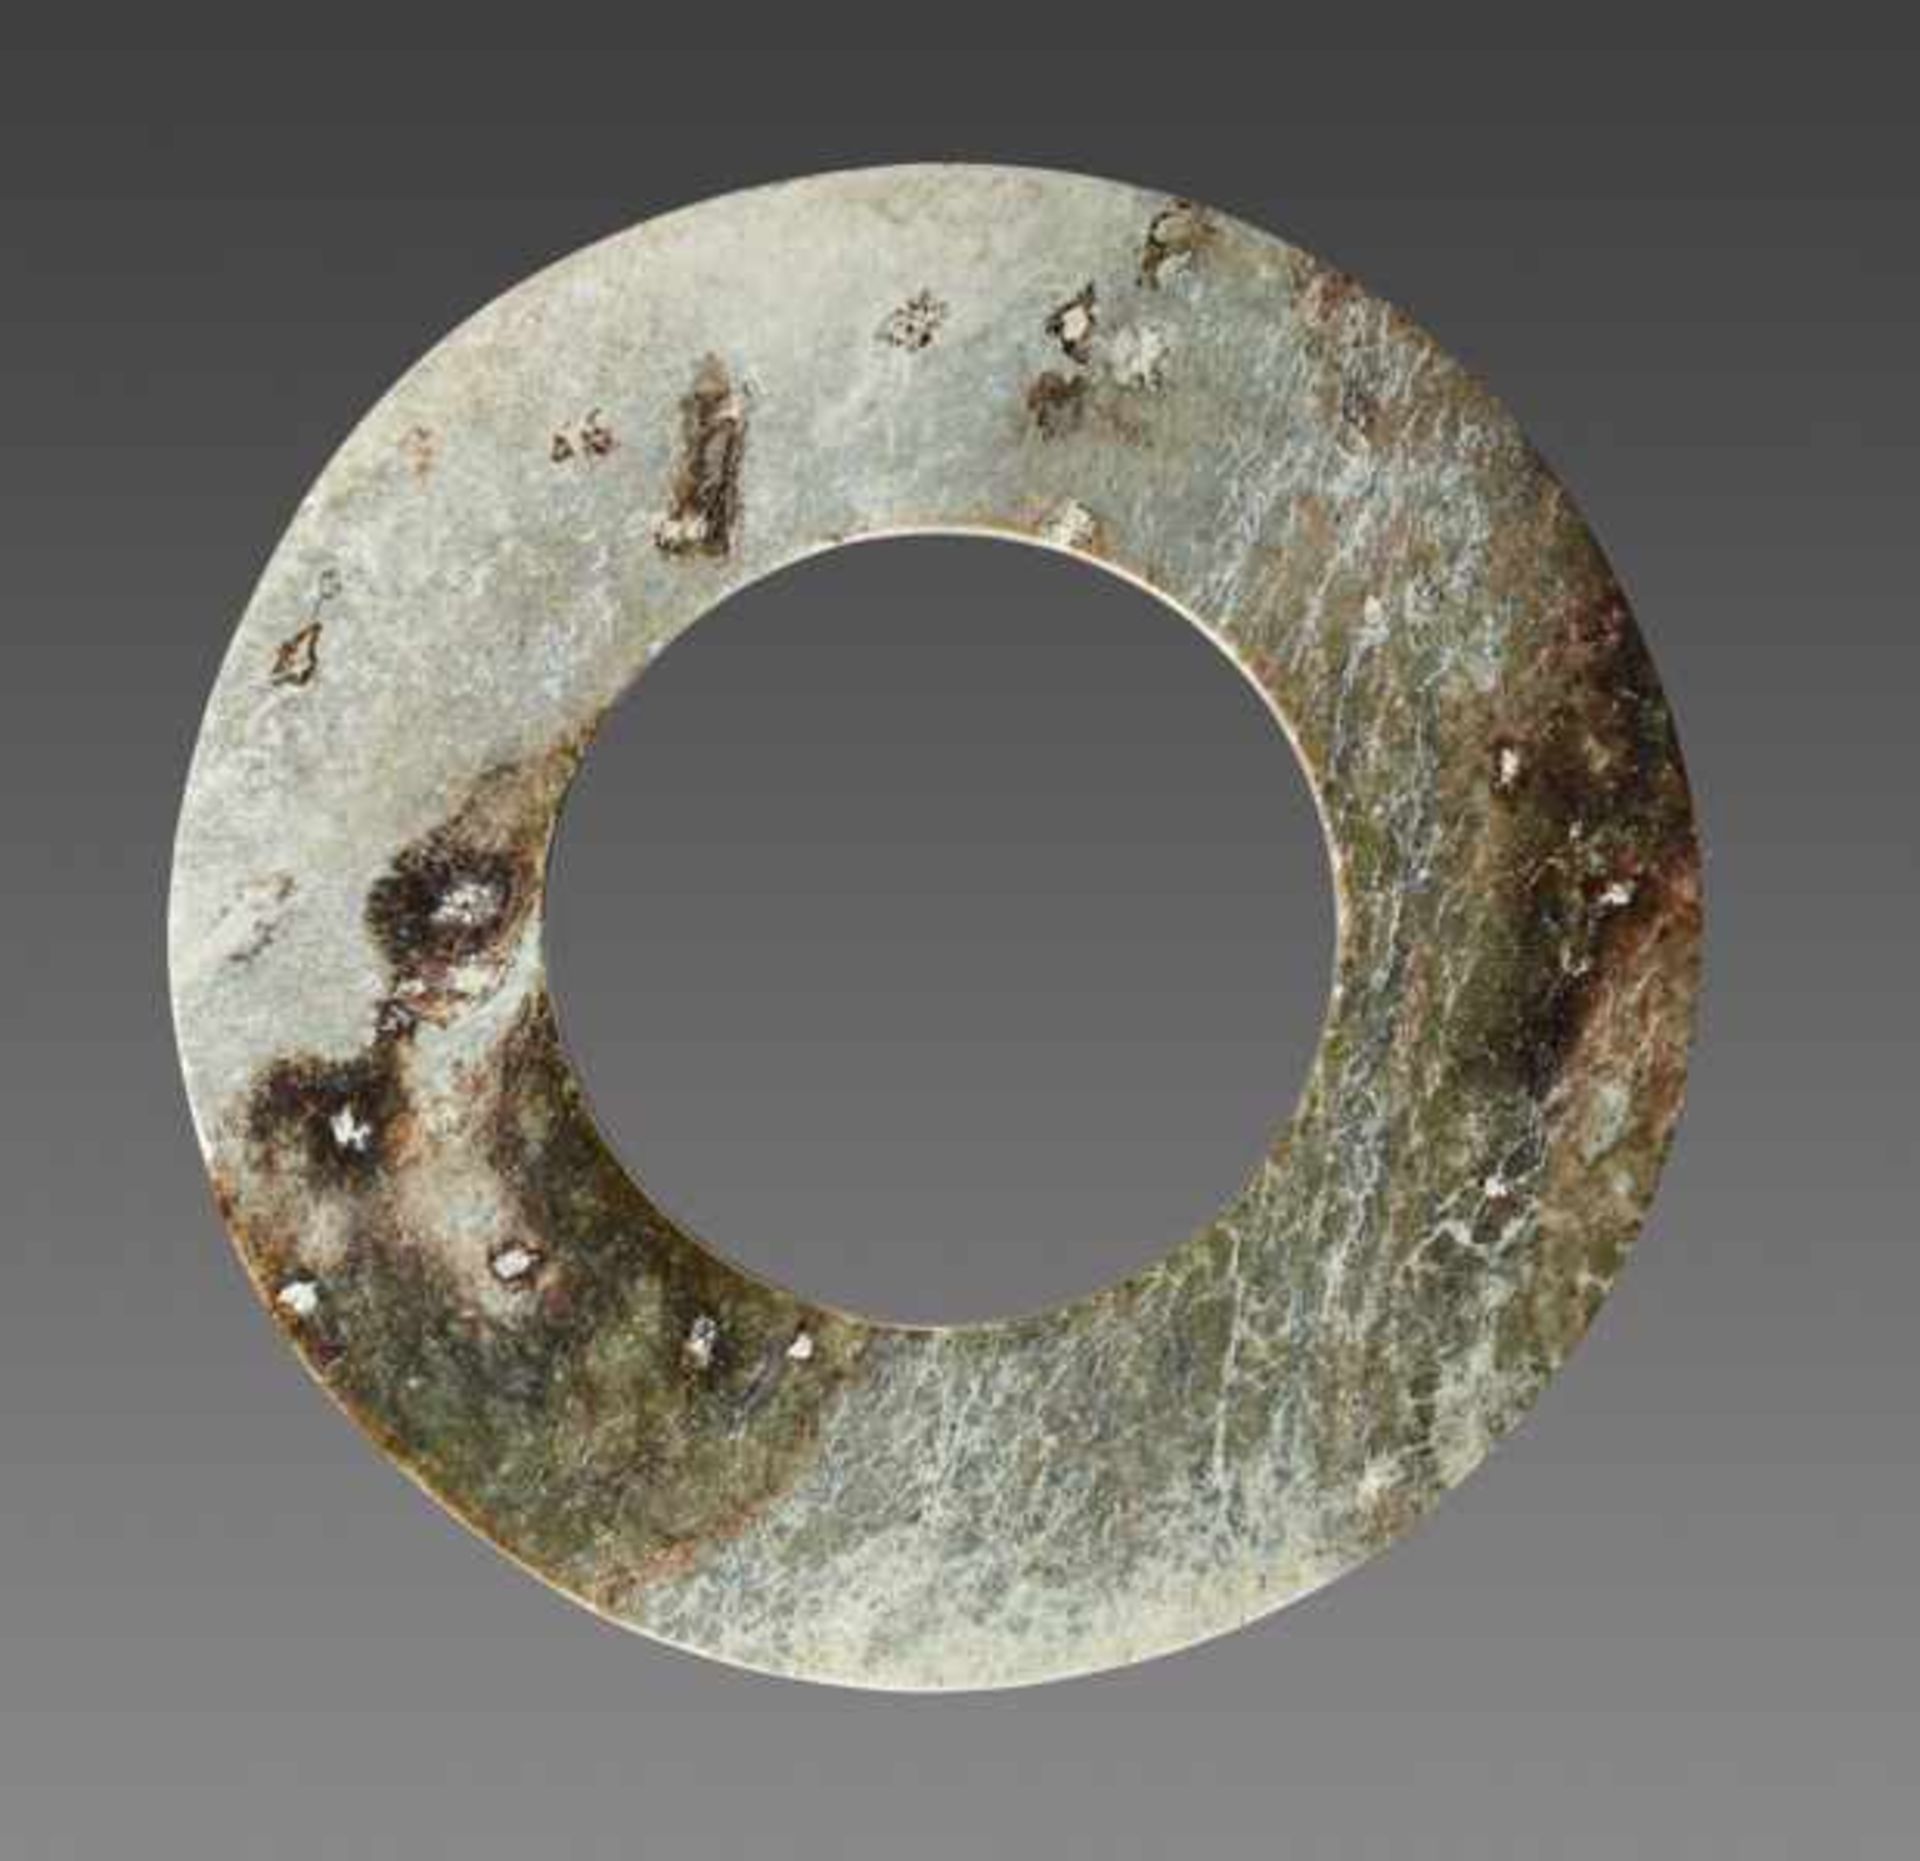 DISC YUAN Jade. China, late Neolithic to early Bronze Age, ca. 2000 - 1600 BCBoth sides of this